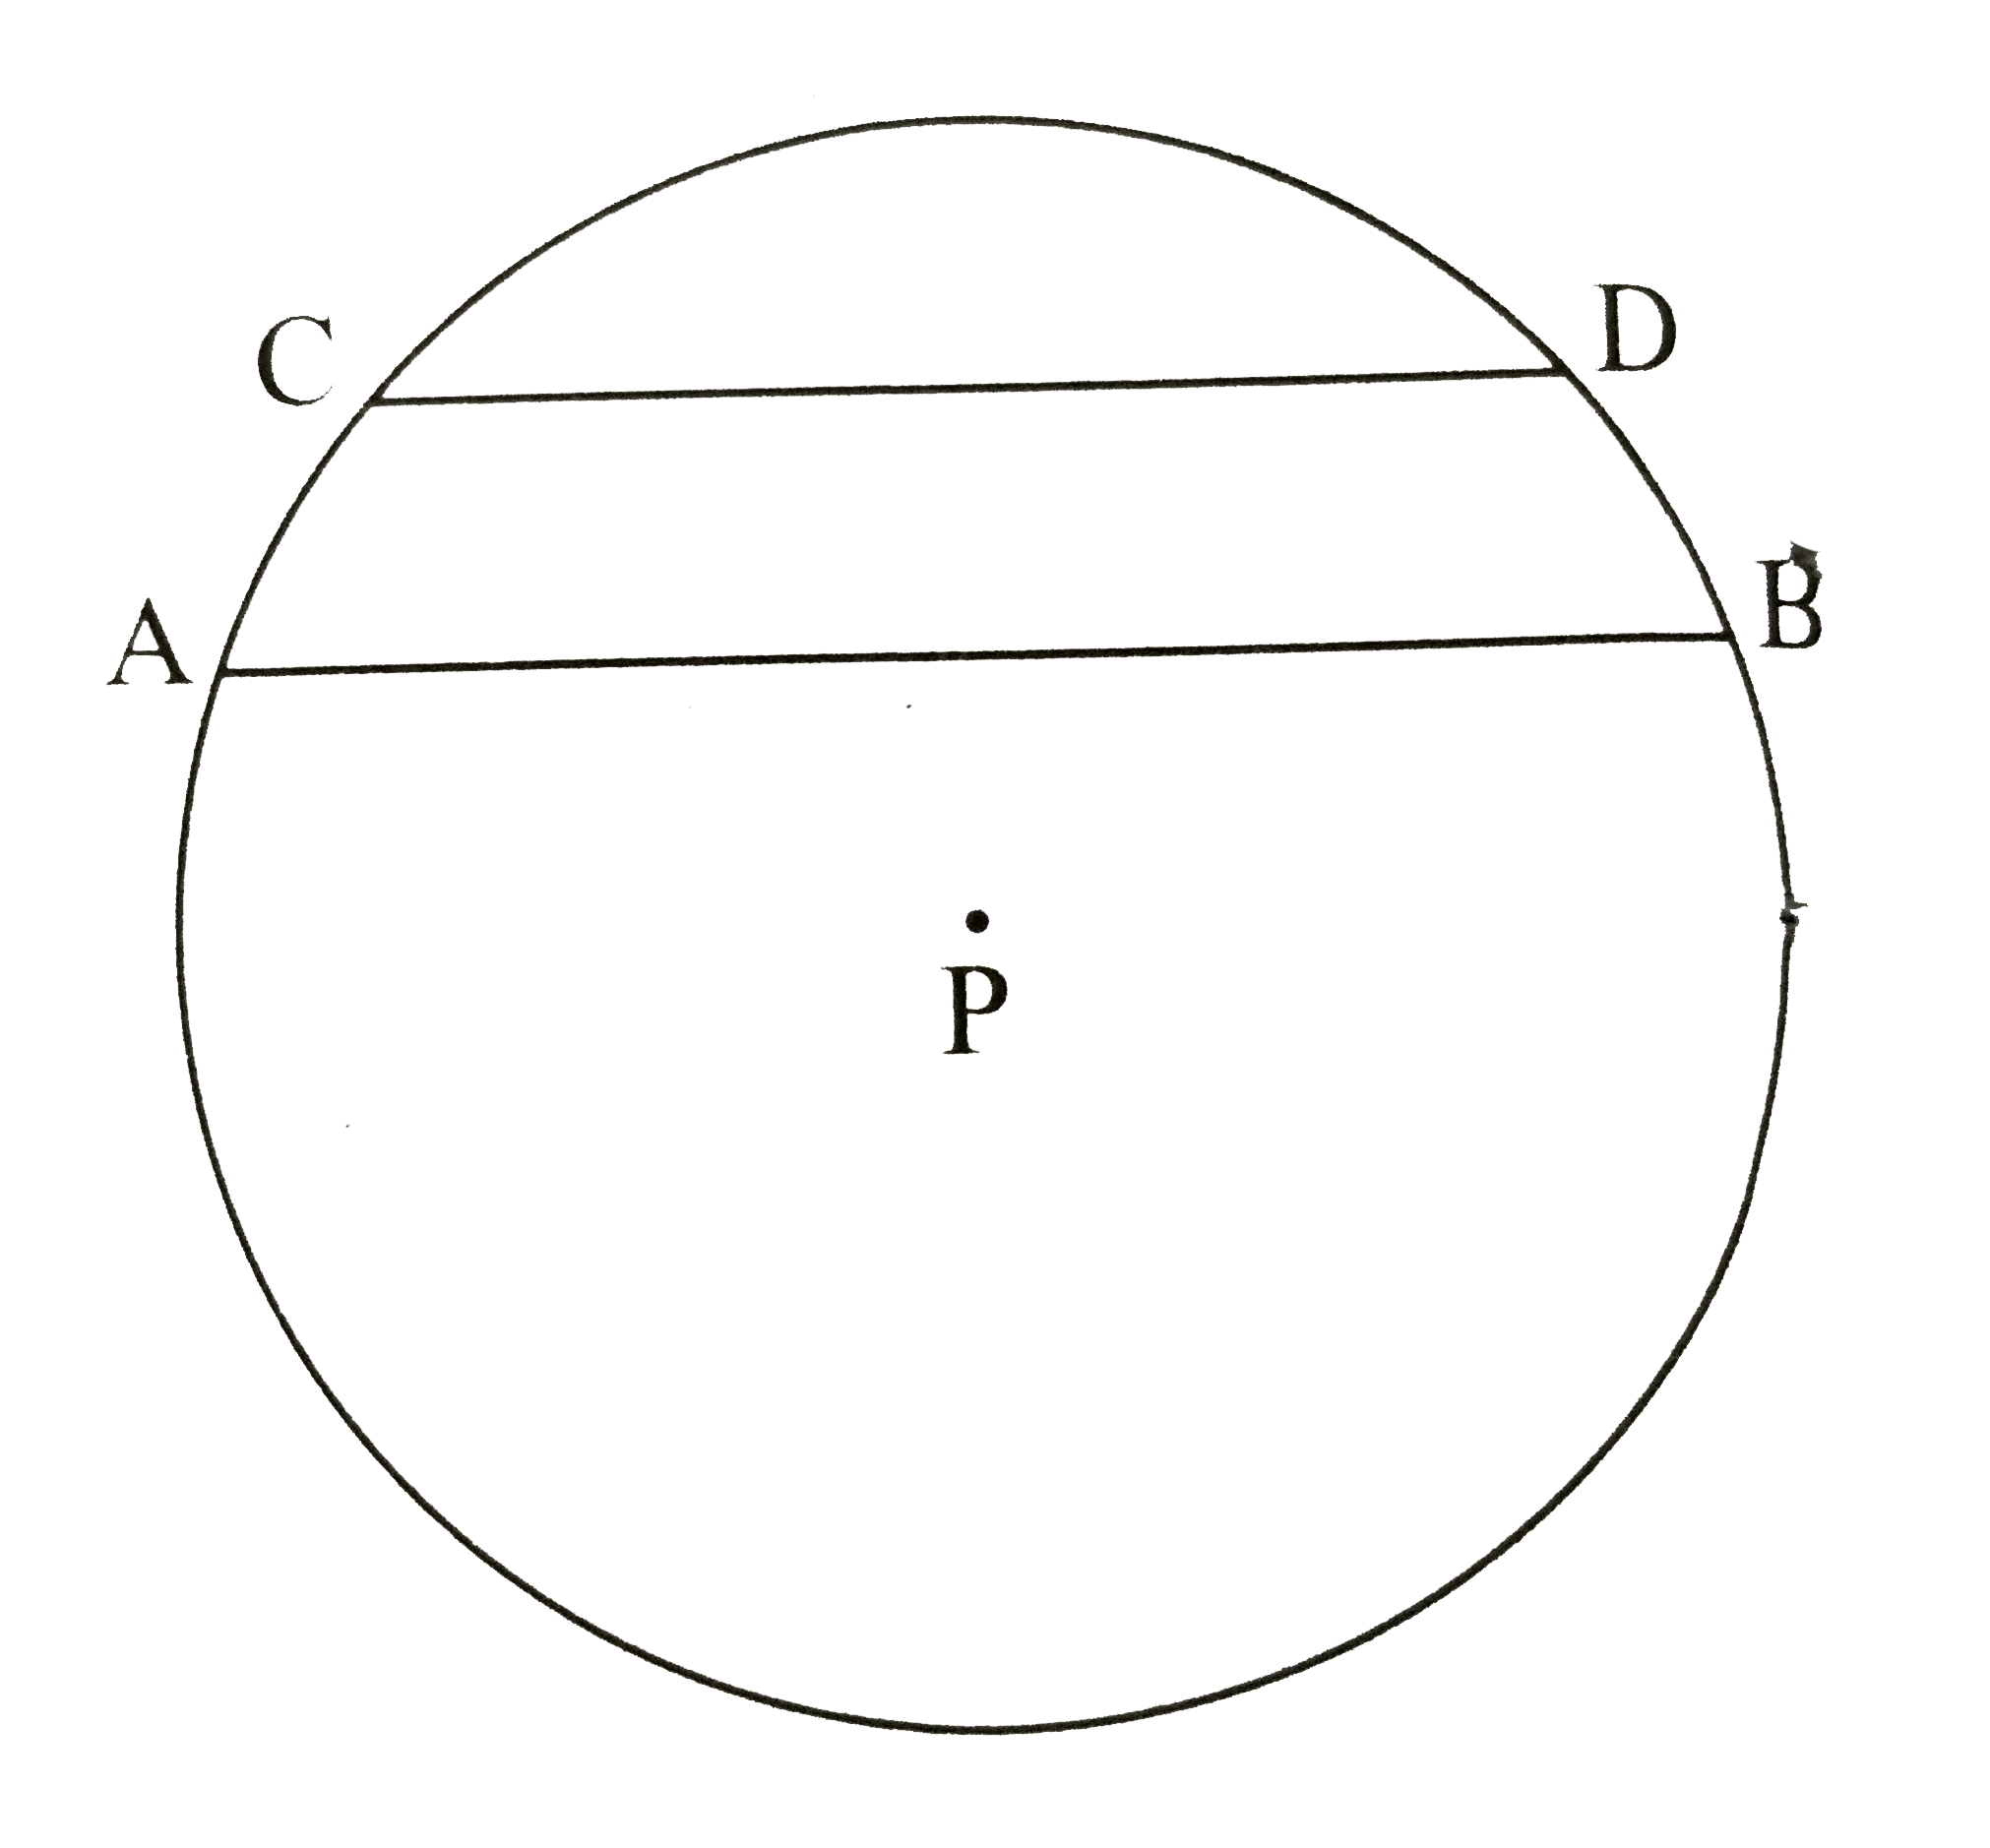 In the figure, two chords AB and  CD are parallel to each other. P is the centre of the circle.   Show that / CPA ~= / DPB  .